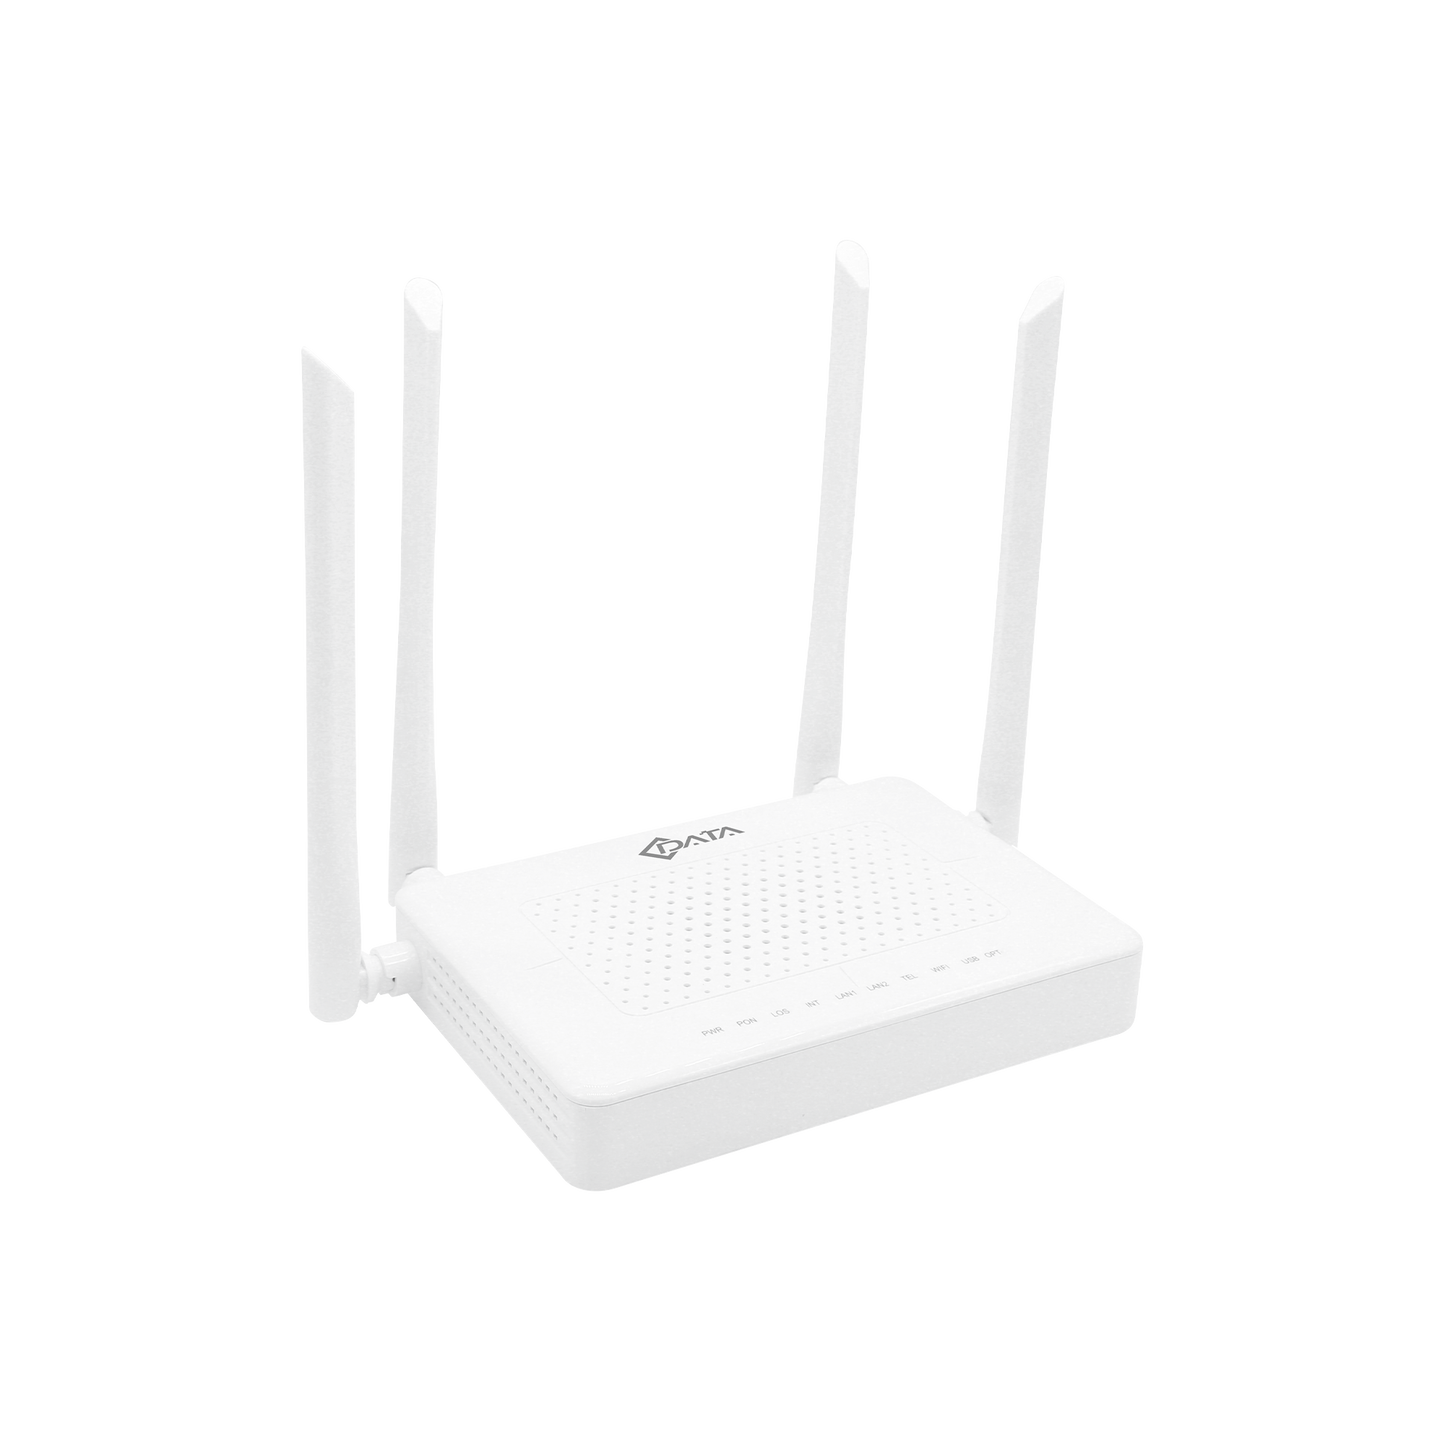 EPON/GPON ONU WIFI 2.4G/5G 802.11 a/b/g/n/ac, 1 "Tel POTS" ports, 2 Ethernet ports 10/100/1000, GPON: Up to 2.488Gbps/1.244Gbps